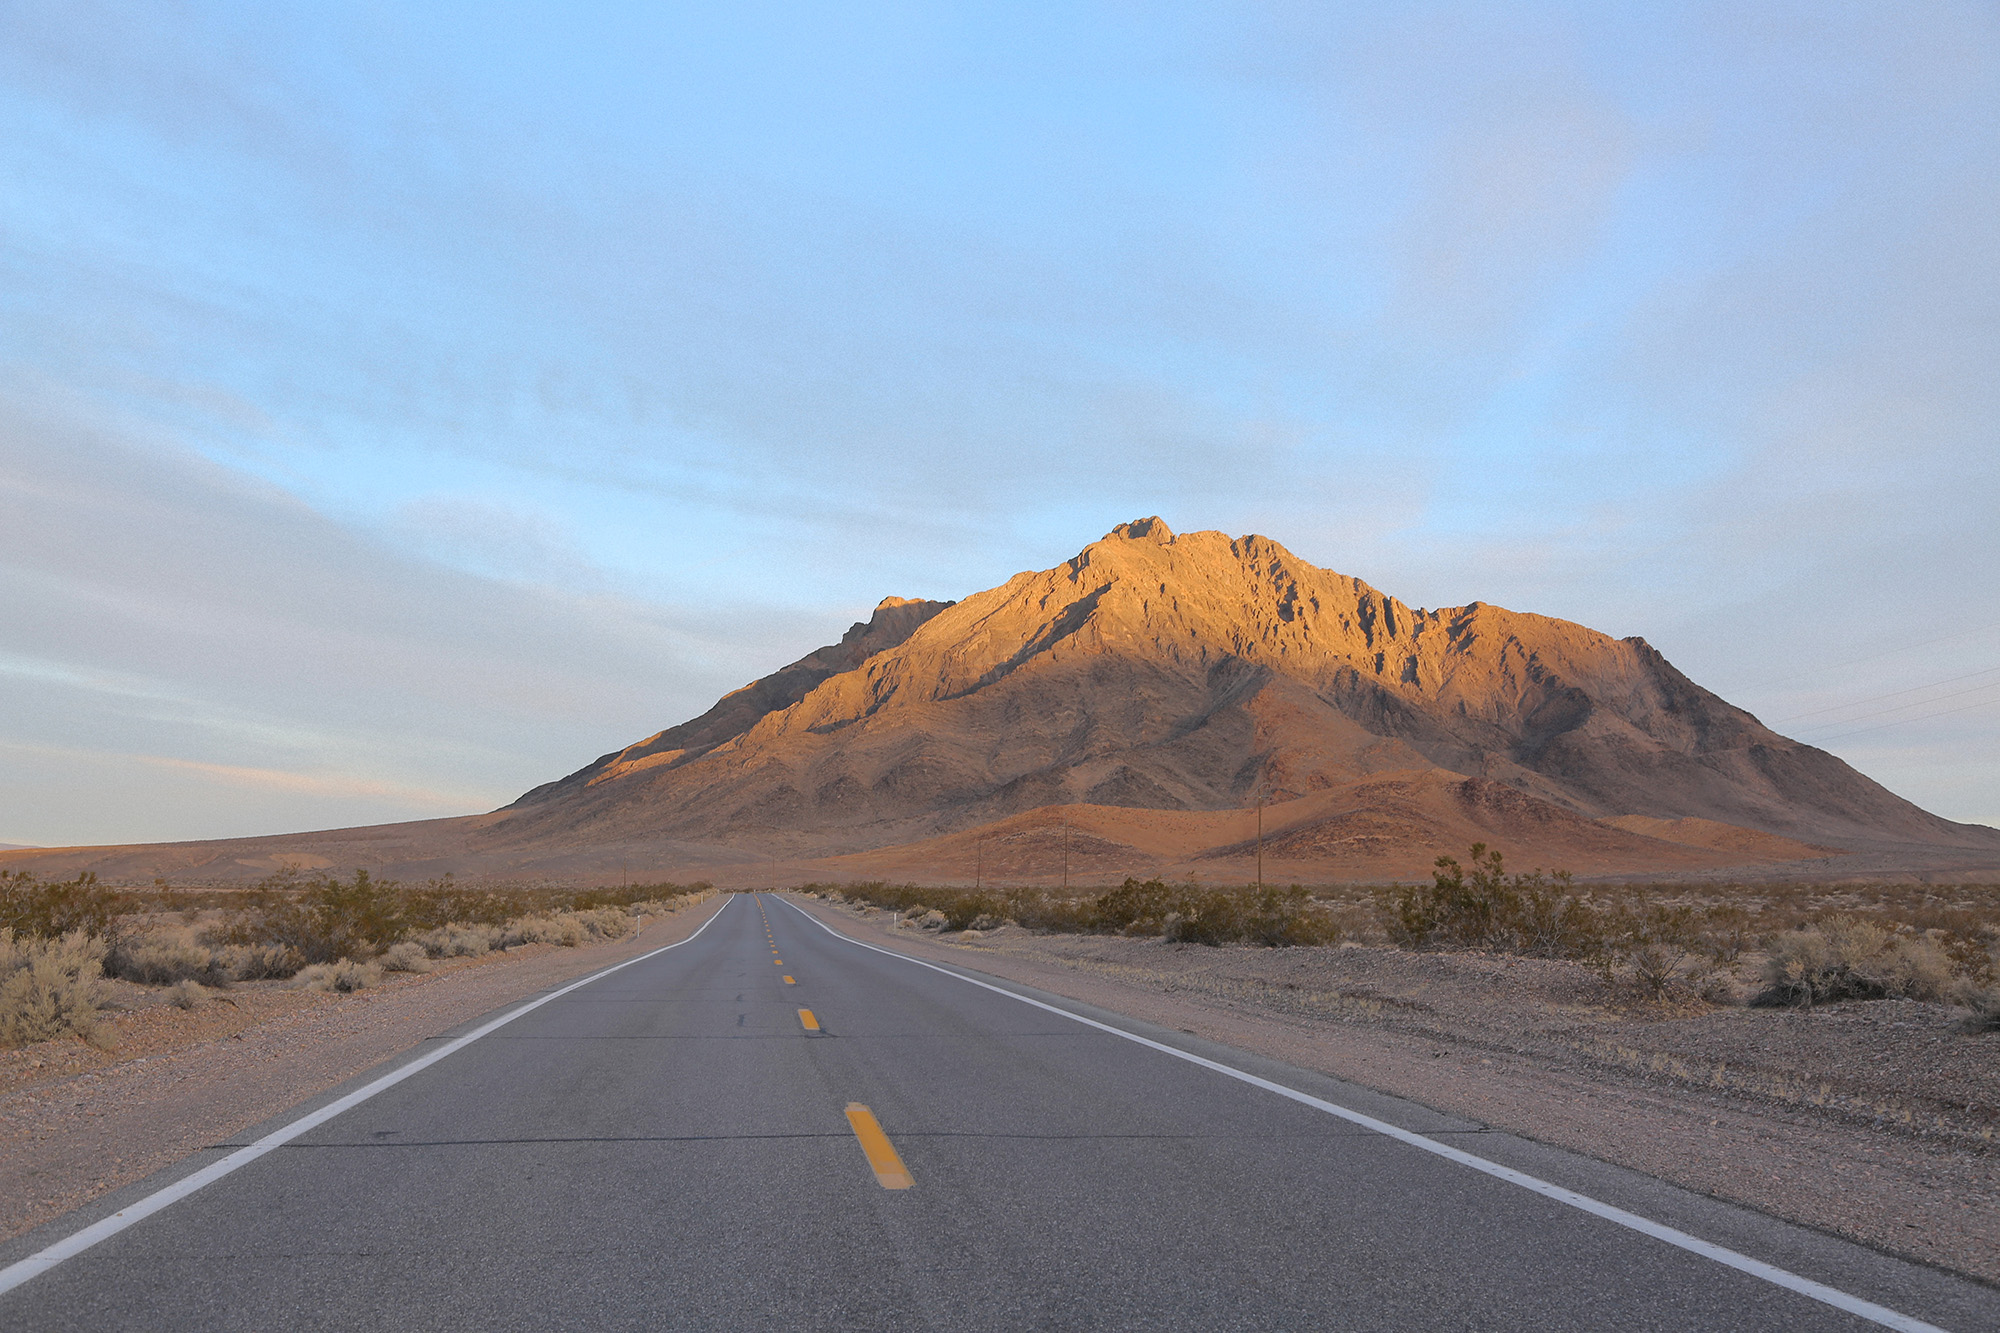 A paved road leading to a desert mountain at sunrise in Death Valley National Park.